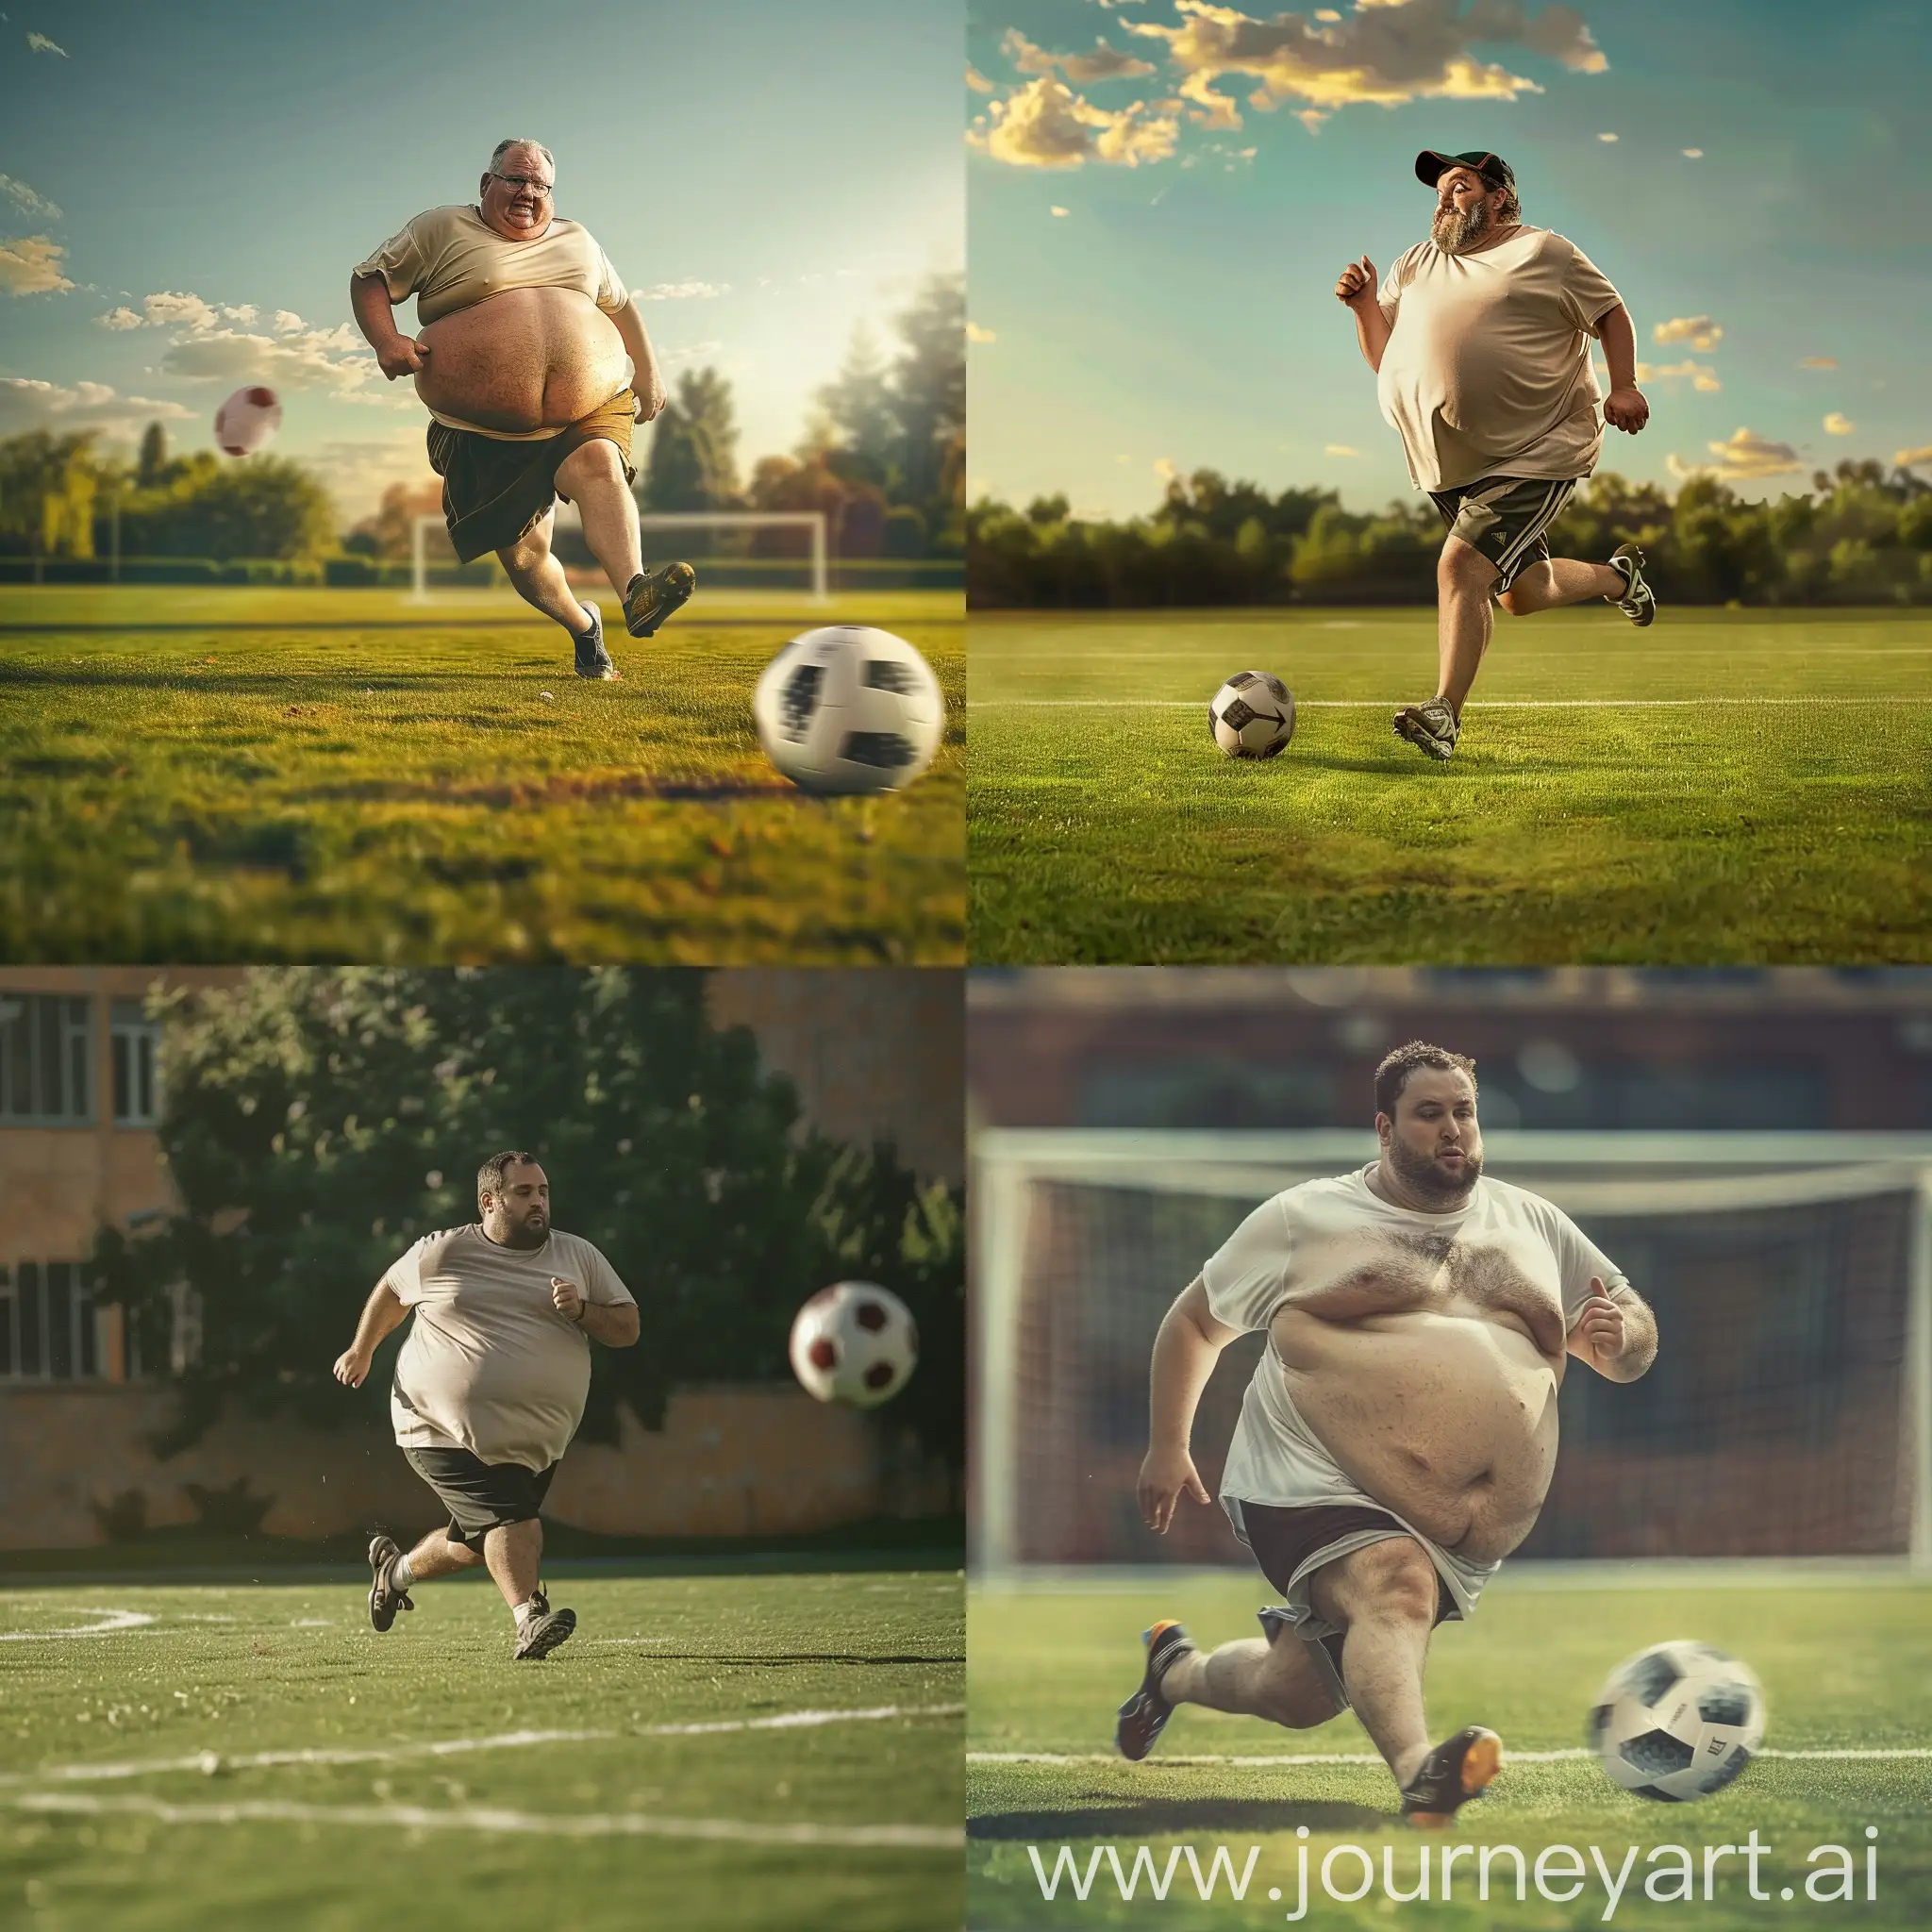 a photo with a fat guy running on a soccer field